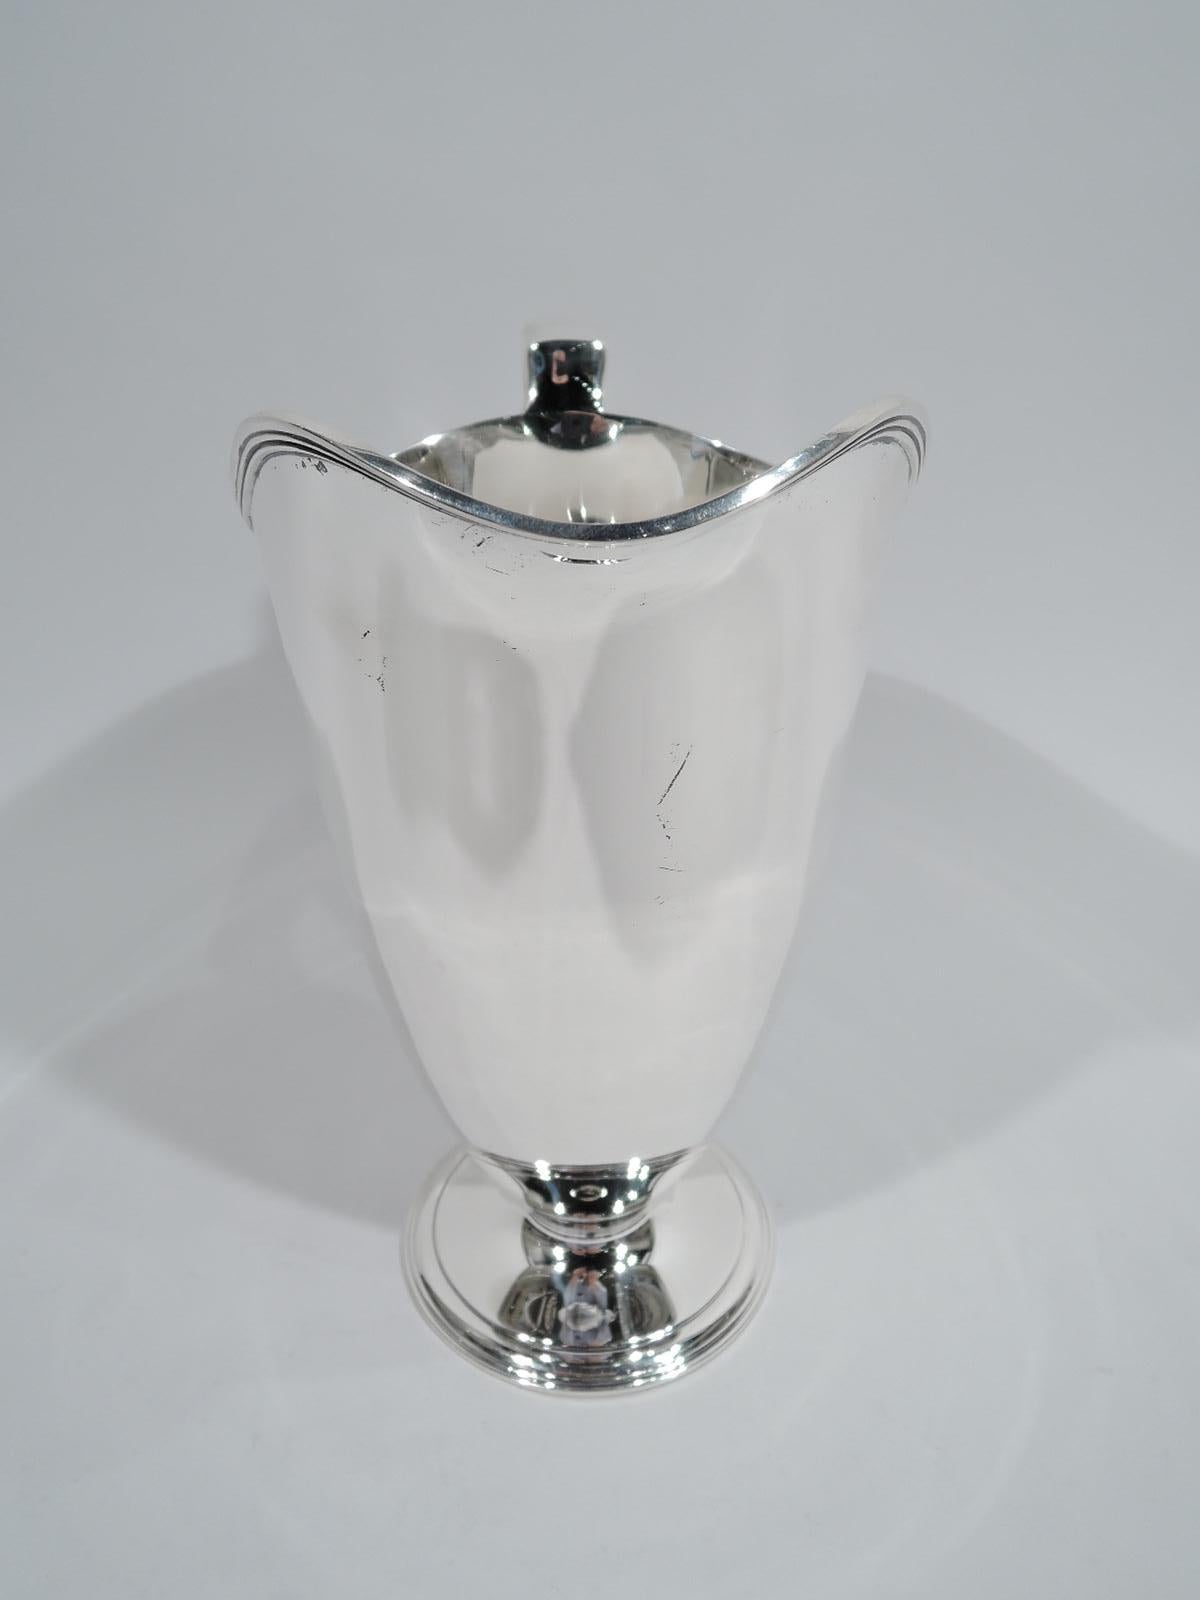 Art Deco Classical sterling silver water pitcher. Made by Tiffany & Co. in New York, ca 1919. Tall and tapering bowl with reeded helmet mouth and scroll bracket handle; foot raised and stepped. Spare and sleek. Fully marked including pattern no.